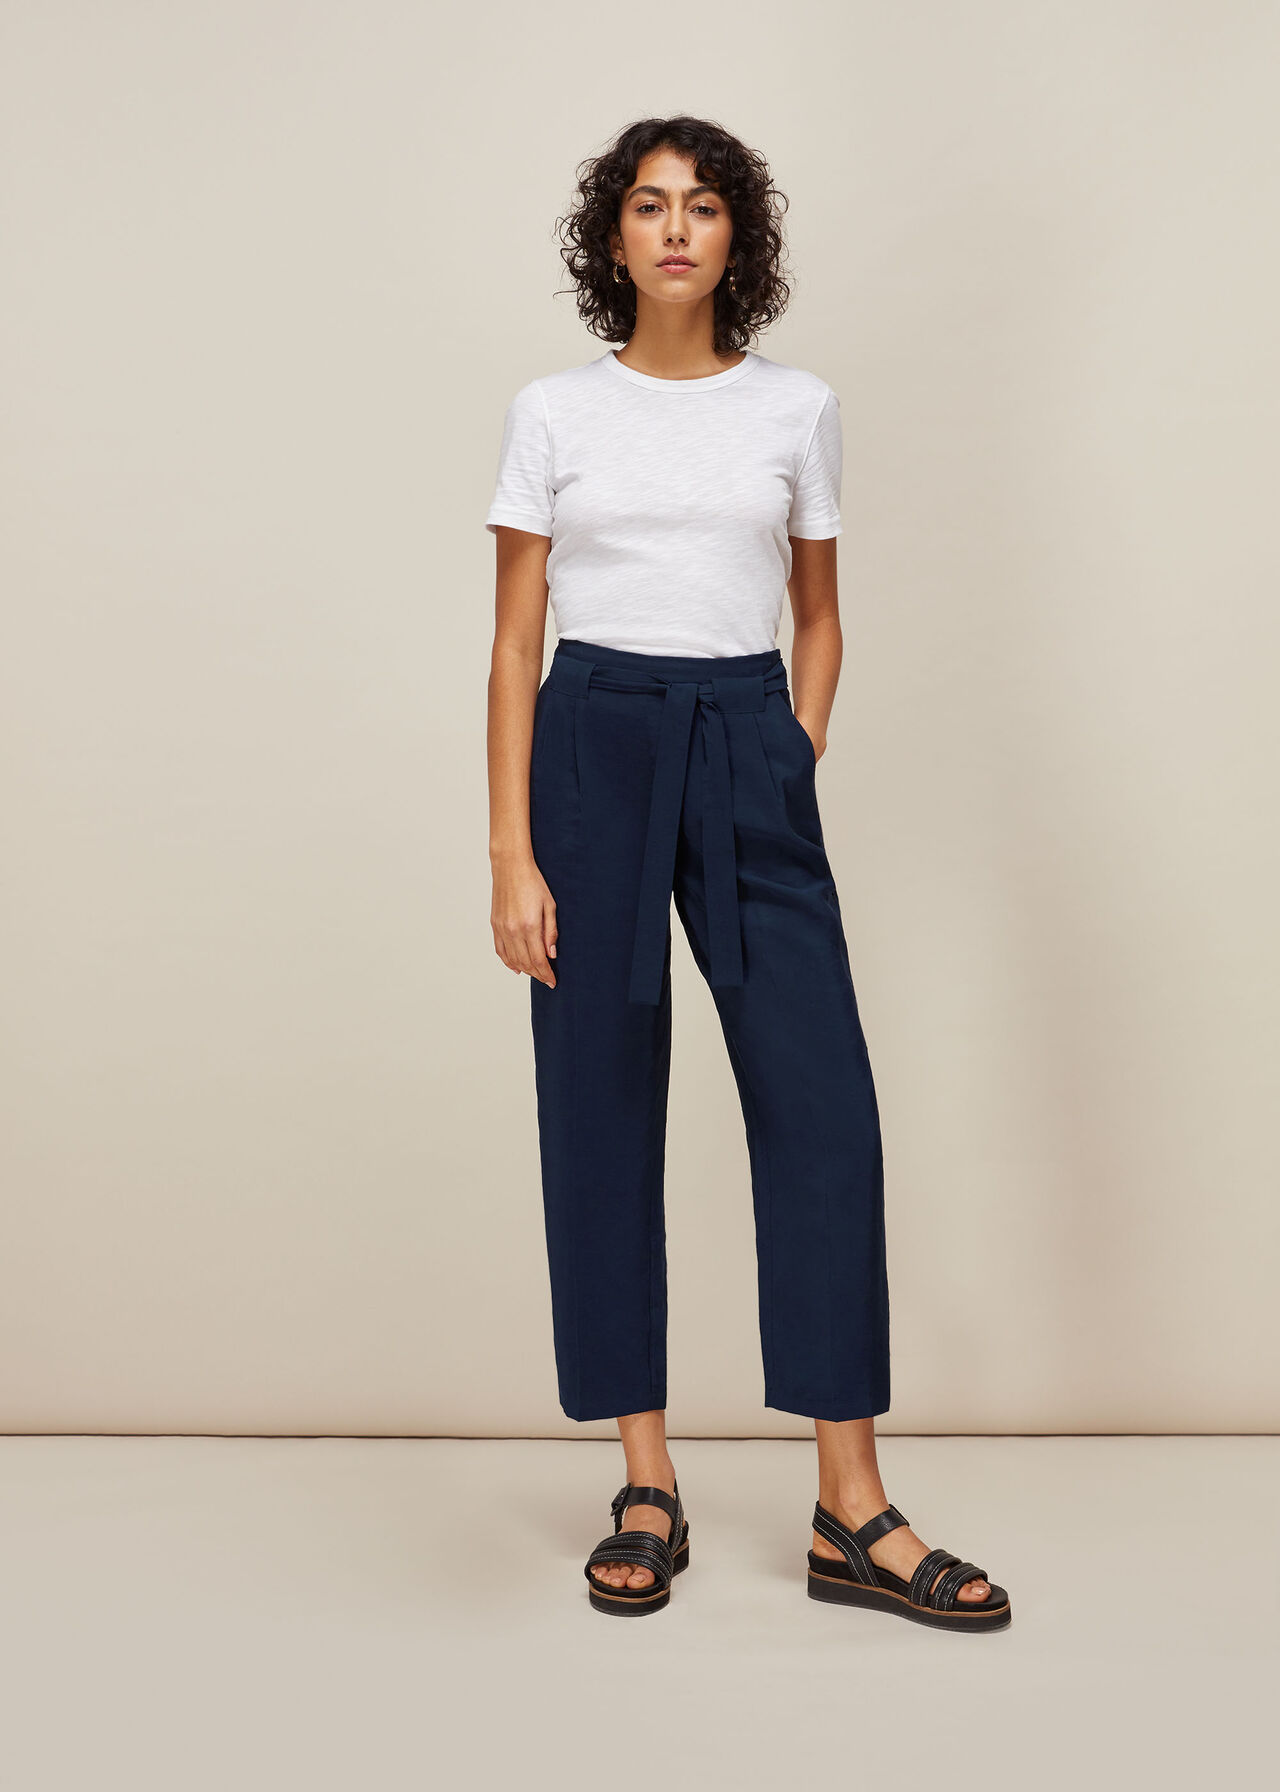 Cropped Trousers - Buy Cropped Trousers Online Starting at Just ₹220